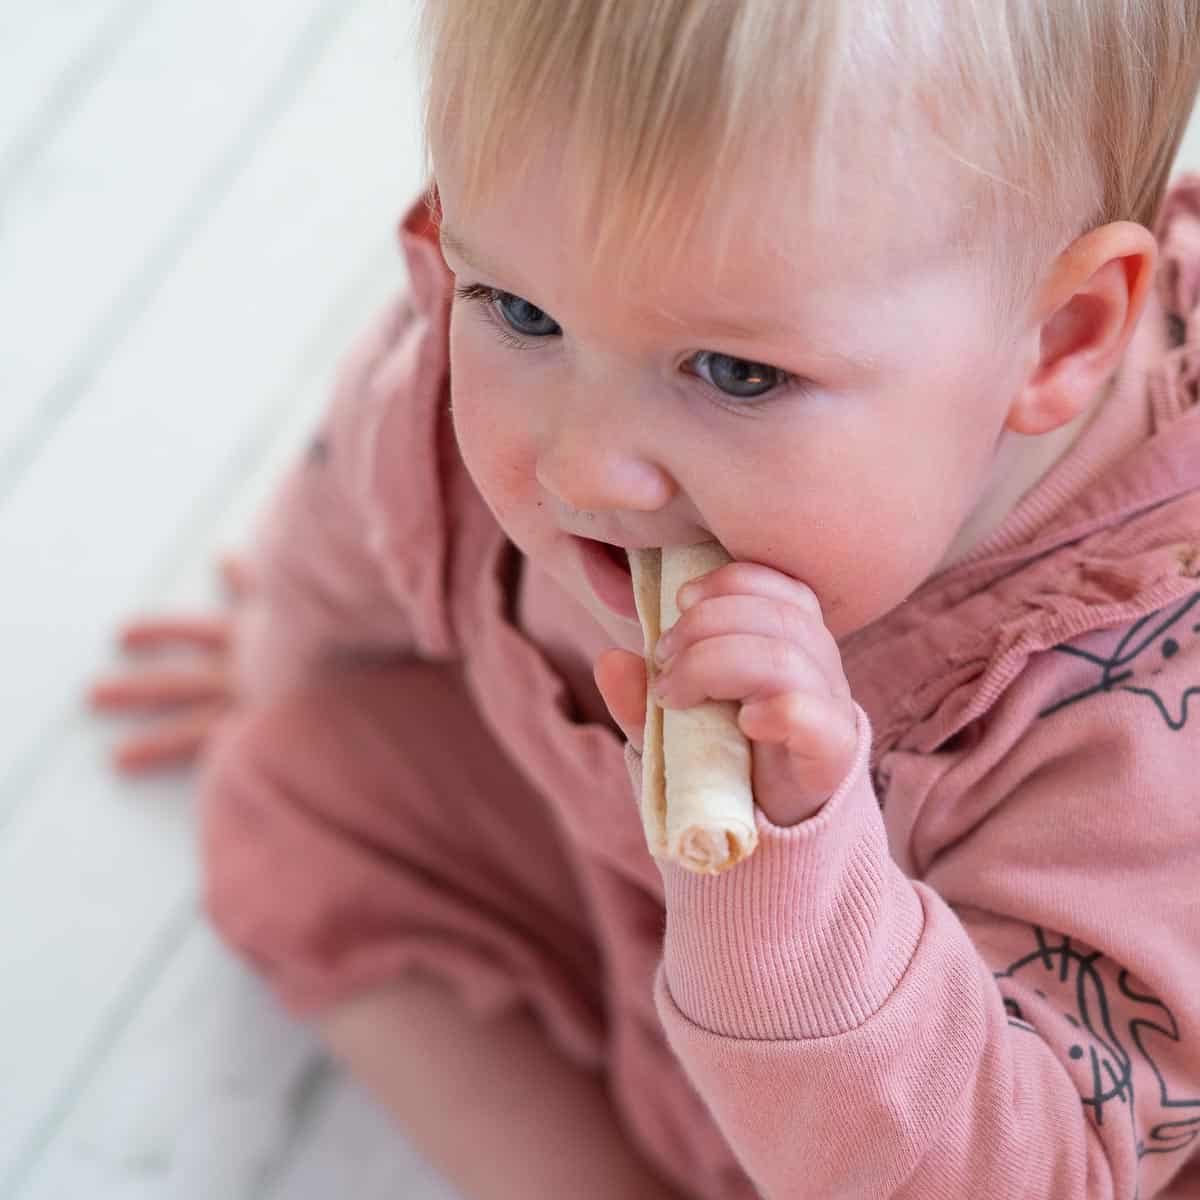 1 year old baby sitting on the floor chewing on a teething rusk